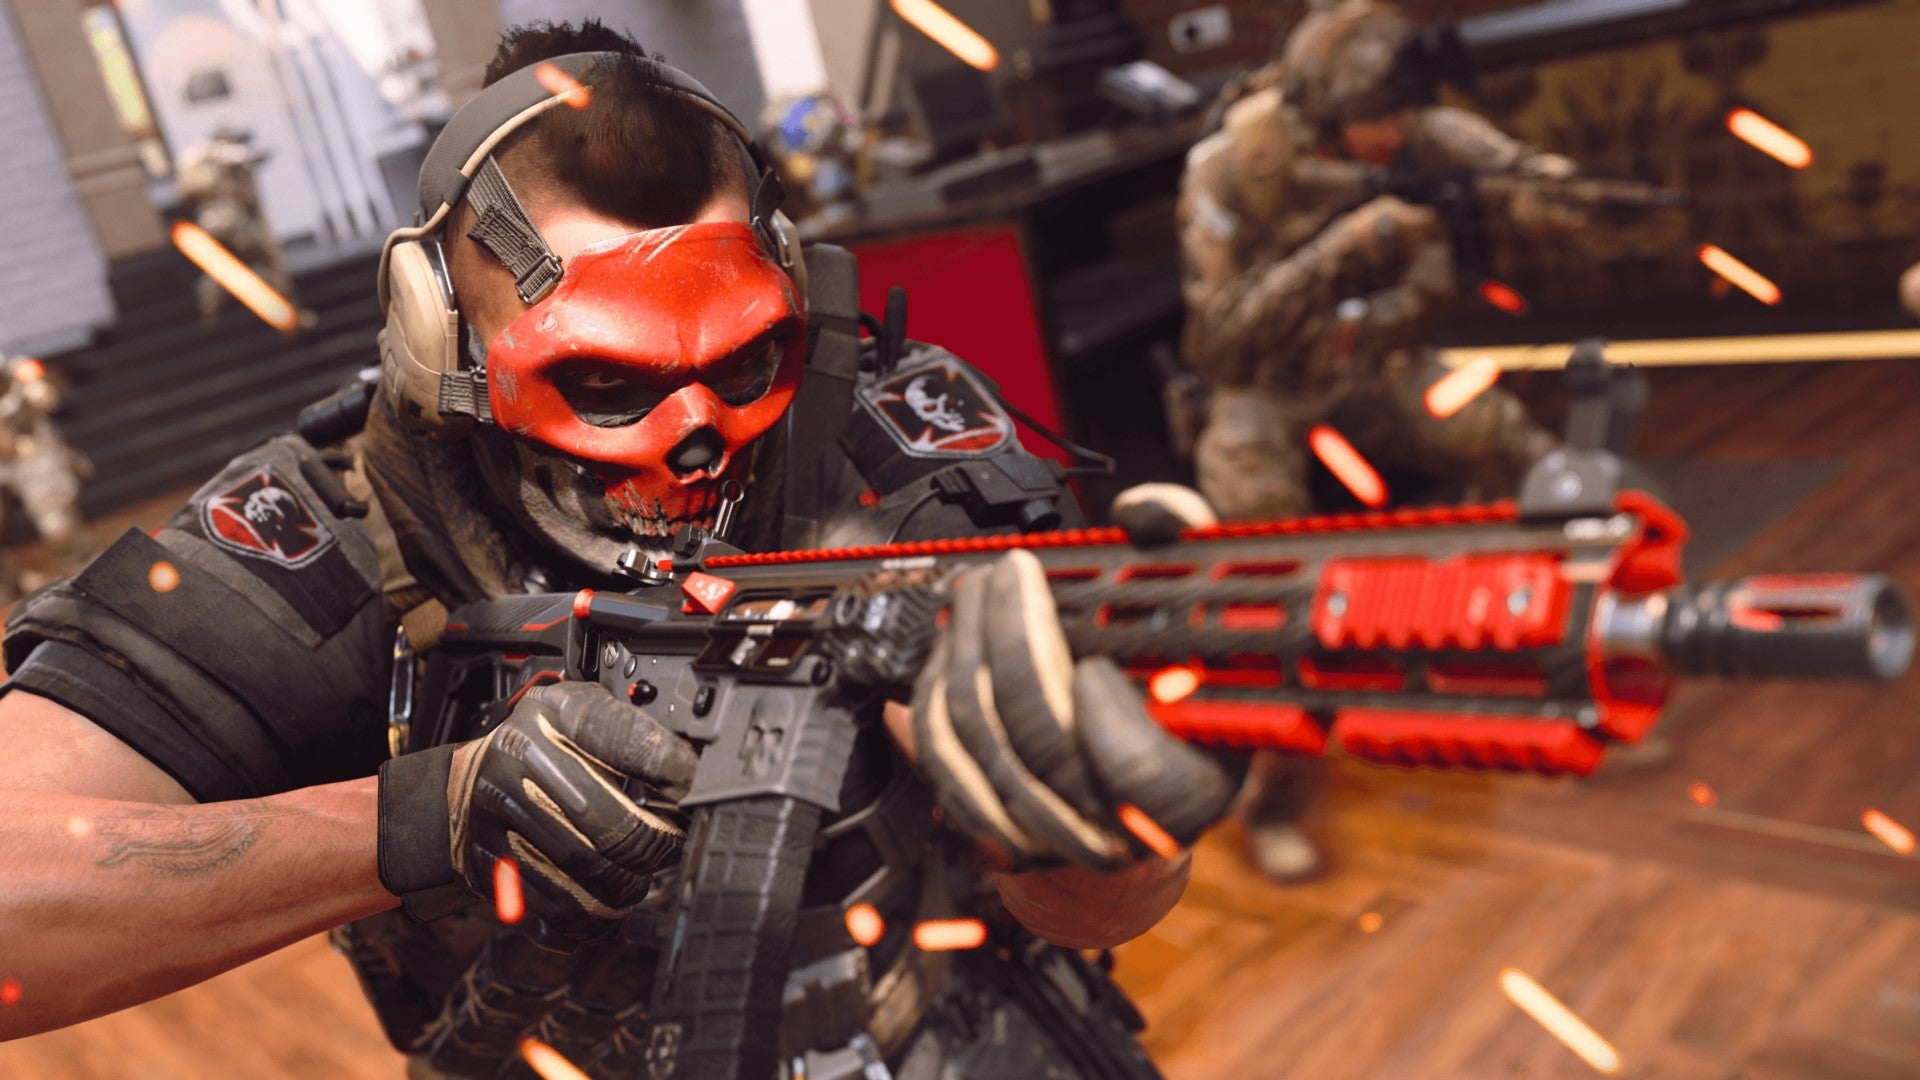 A soldier wearing a red skull mask aims a red M4 assault rifle in Call Of Duty: Modern Warfare 2.